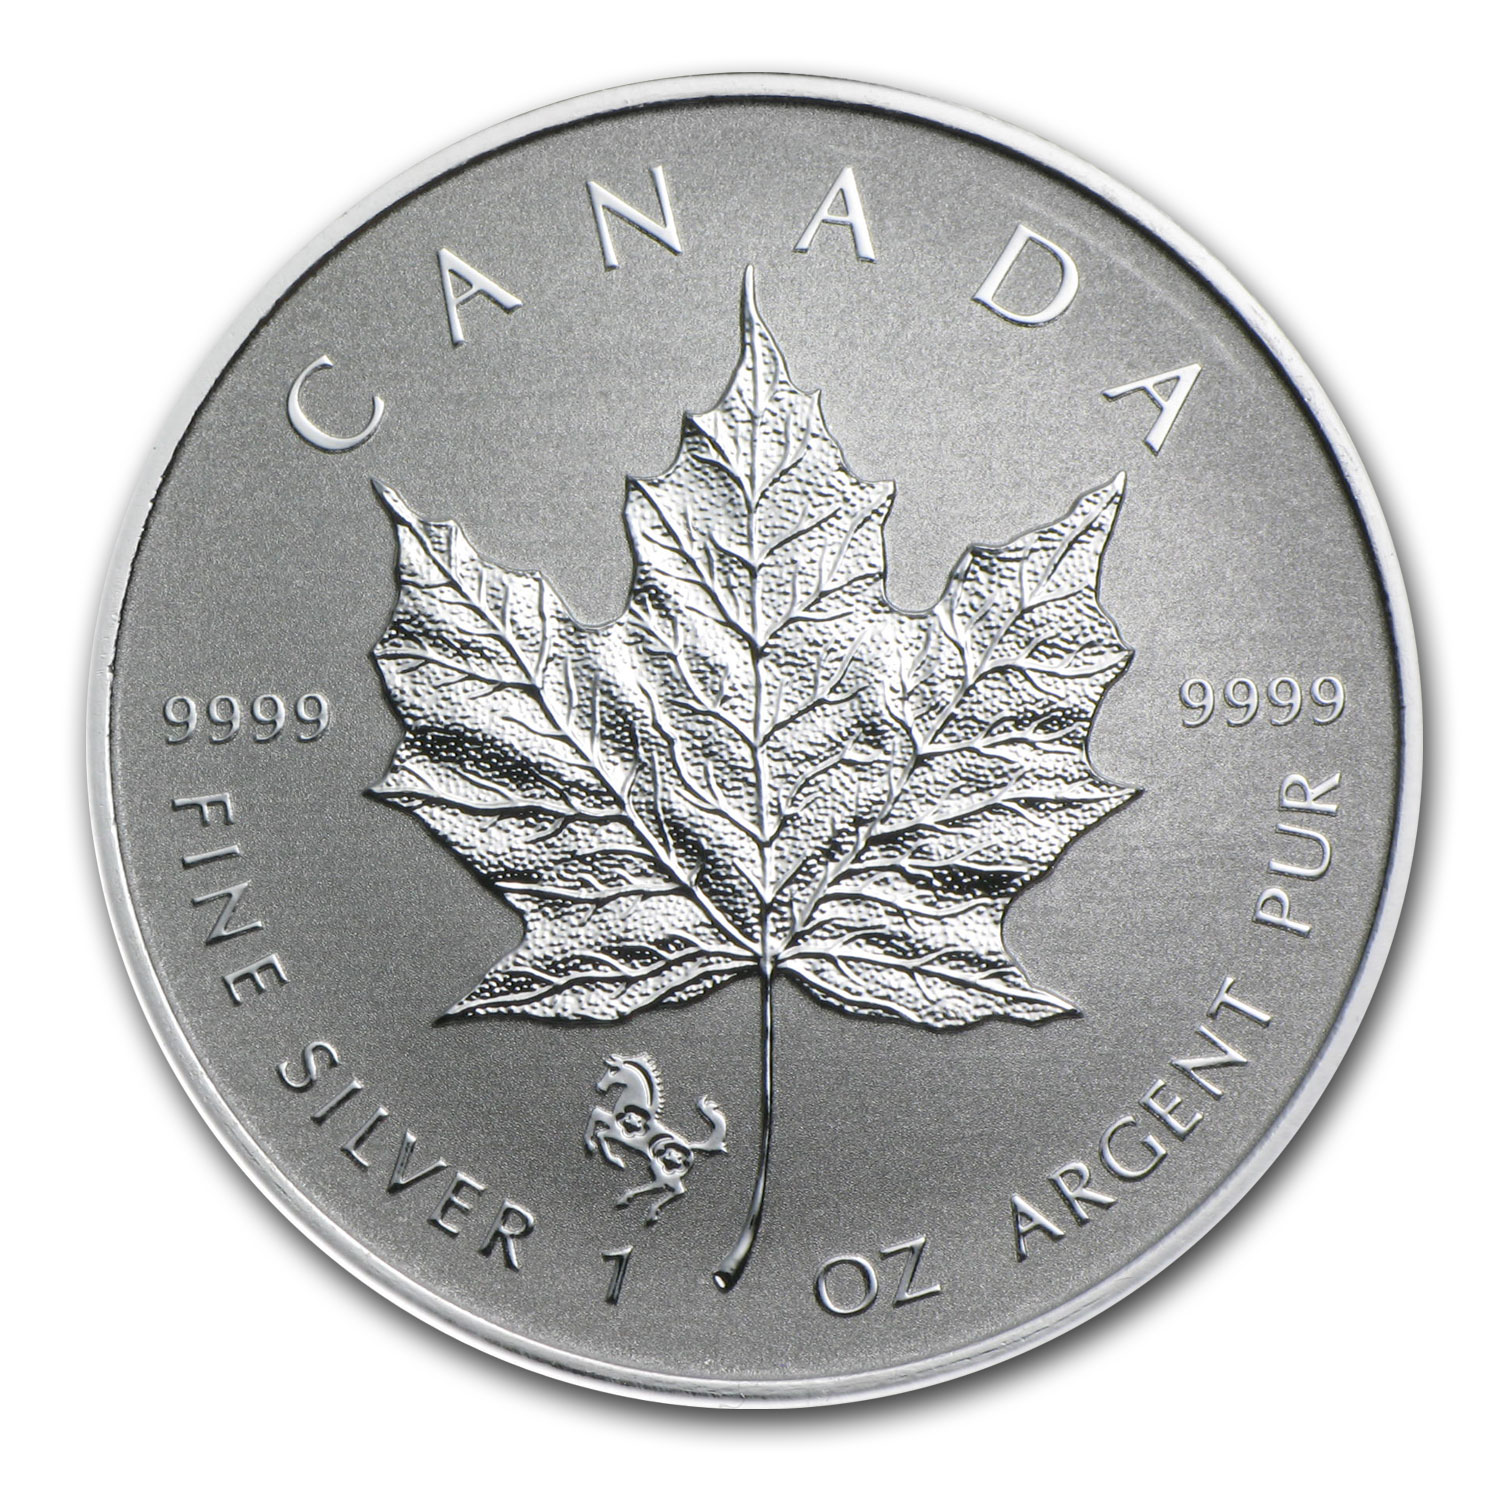 Buy 2014 Canada 1 oz Silver Maple Leaf Horse Privy Reverse Proof